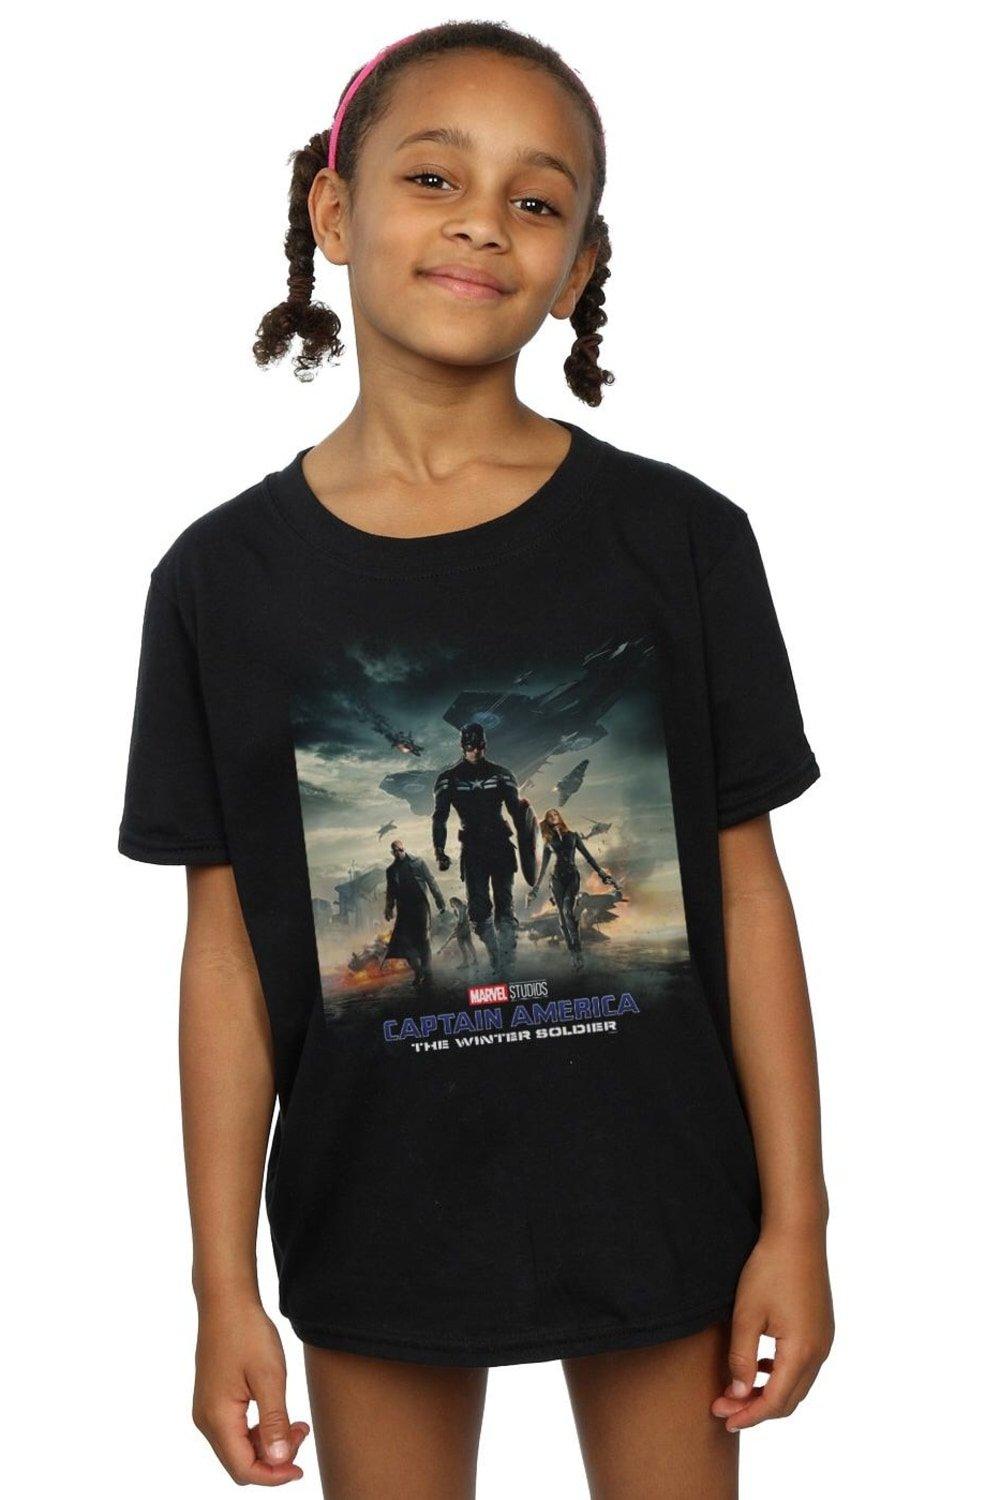 Captain America The Winter Soldier Poster Cotton T-Shirt